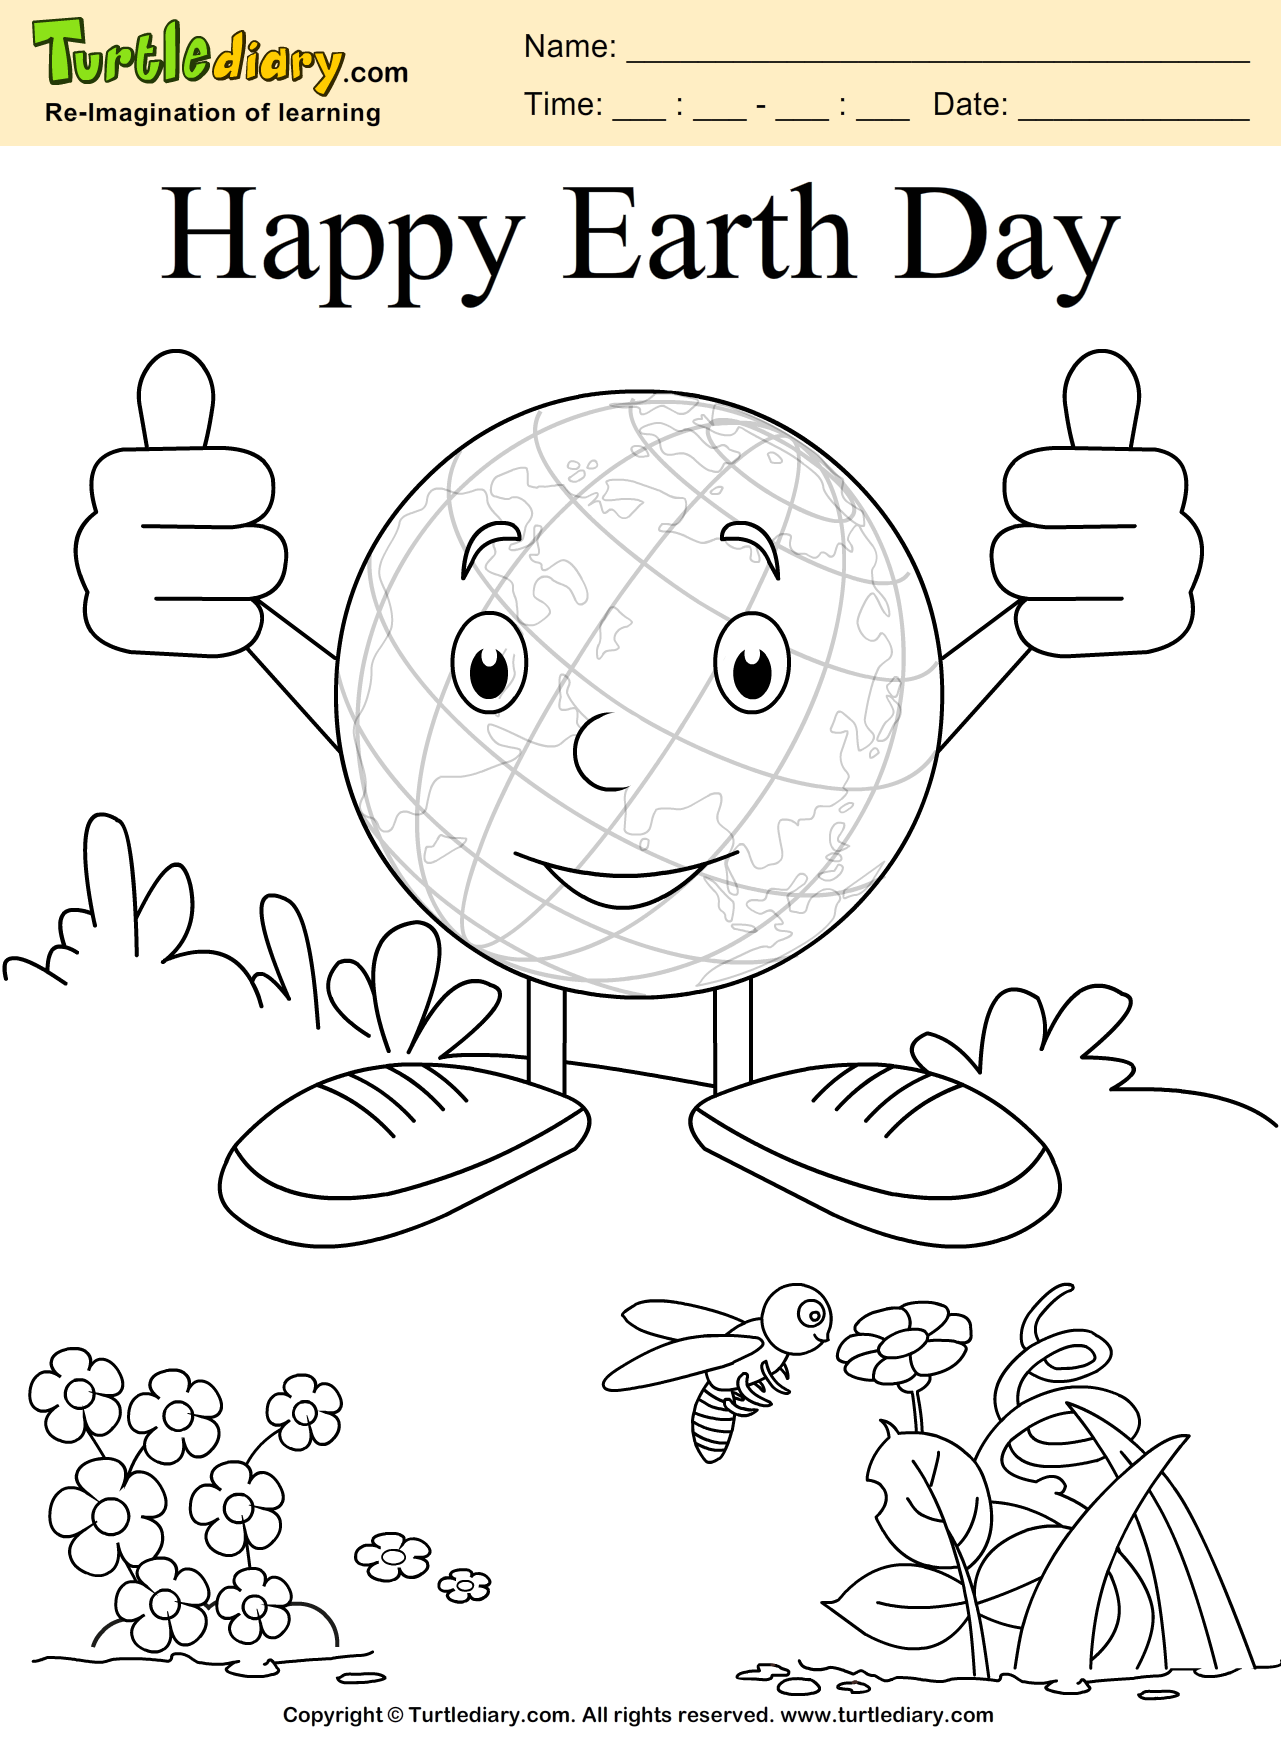 Earth Coloring Page Coloring sheet | Earth day coloring pages, Earth  coloring pages, Coloring pages